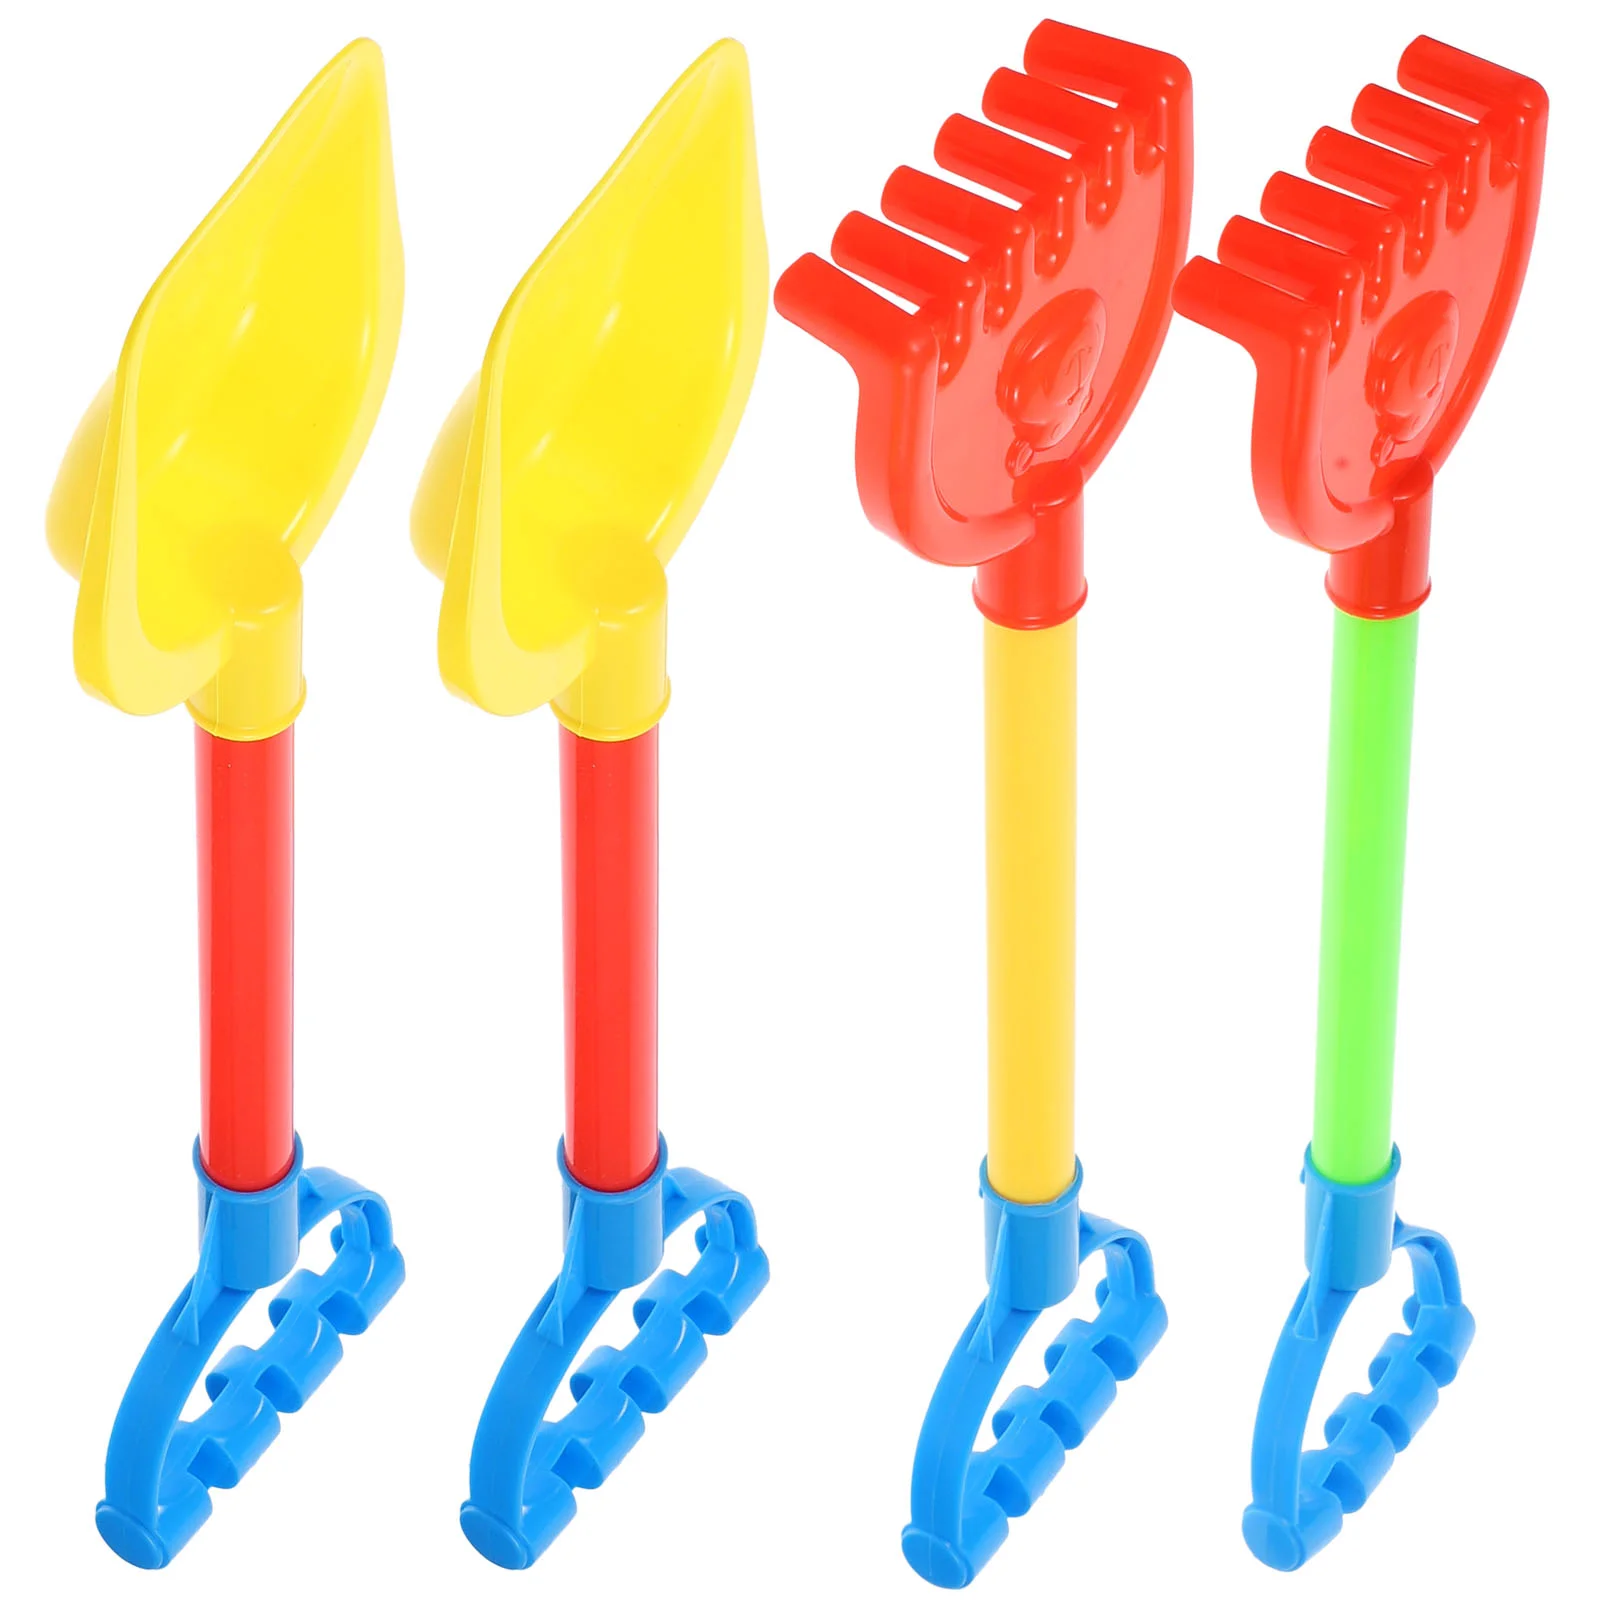 

Beach Toy Children Toys Kids Sand Shovels Rakes Tools Bright Color Heavy Duty for Childrens